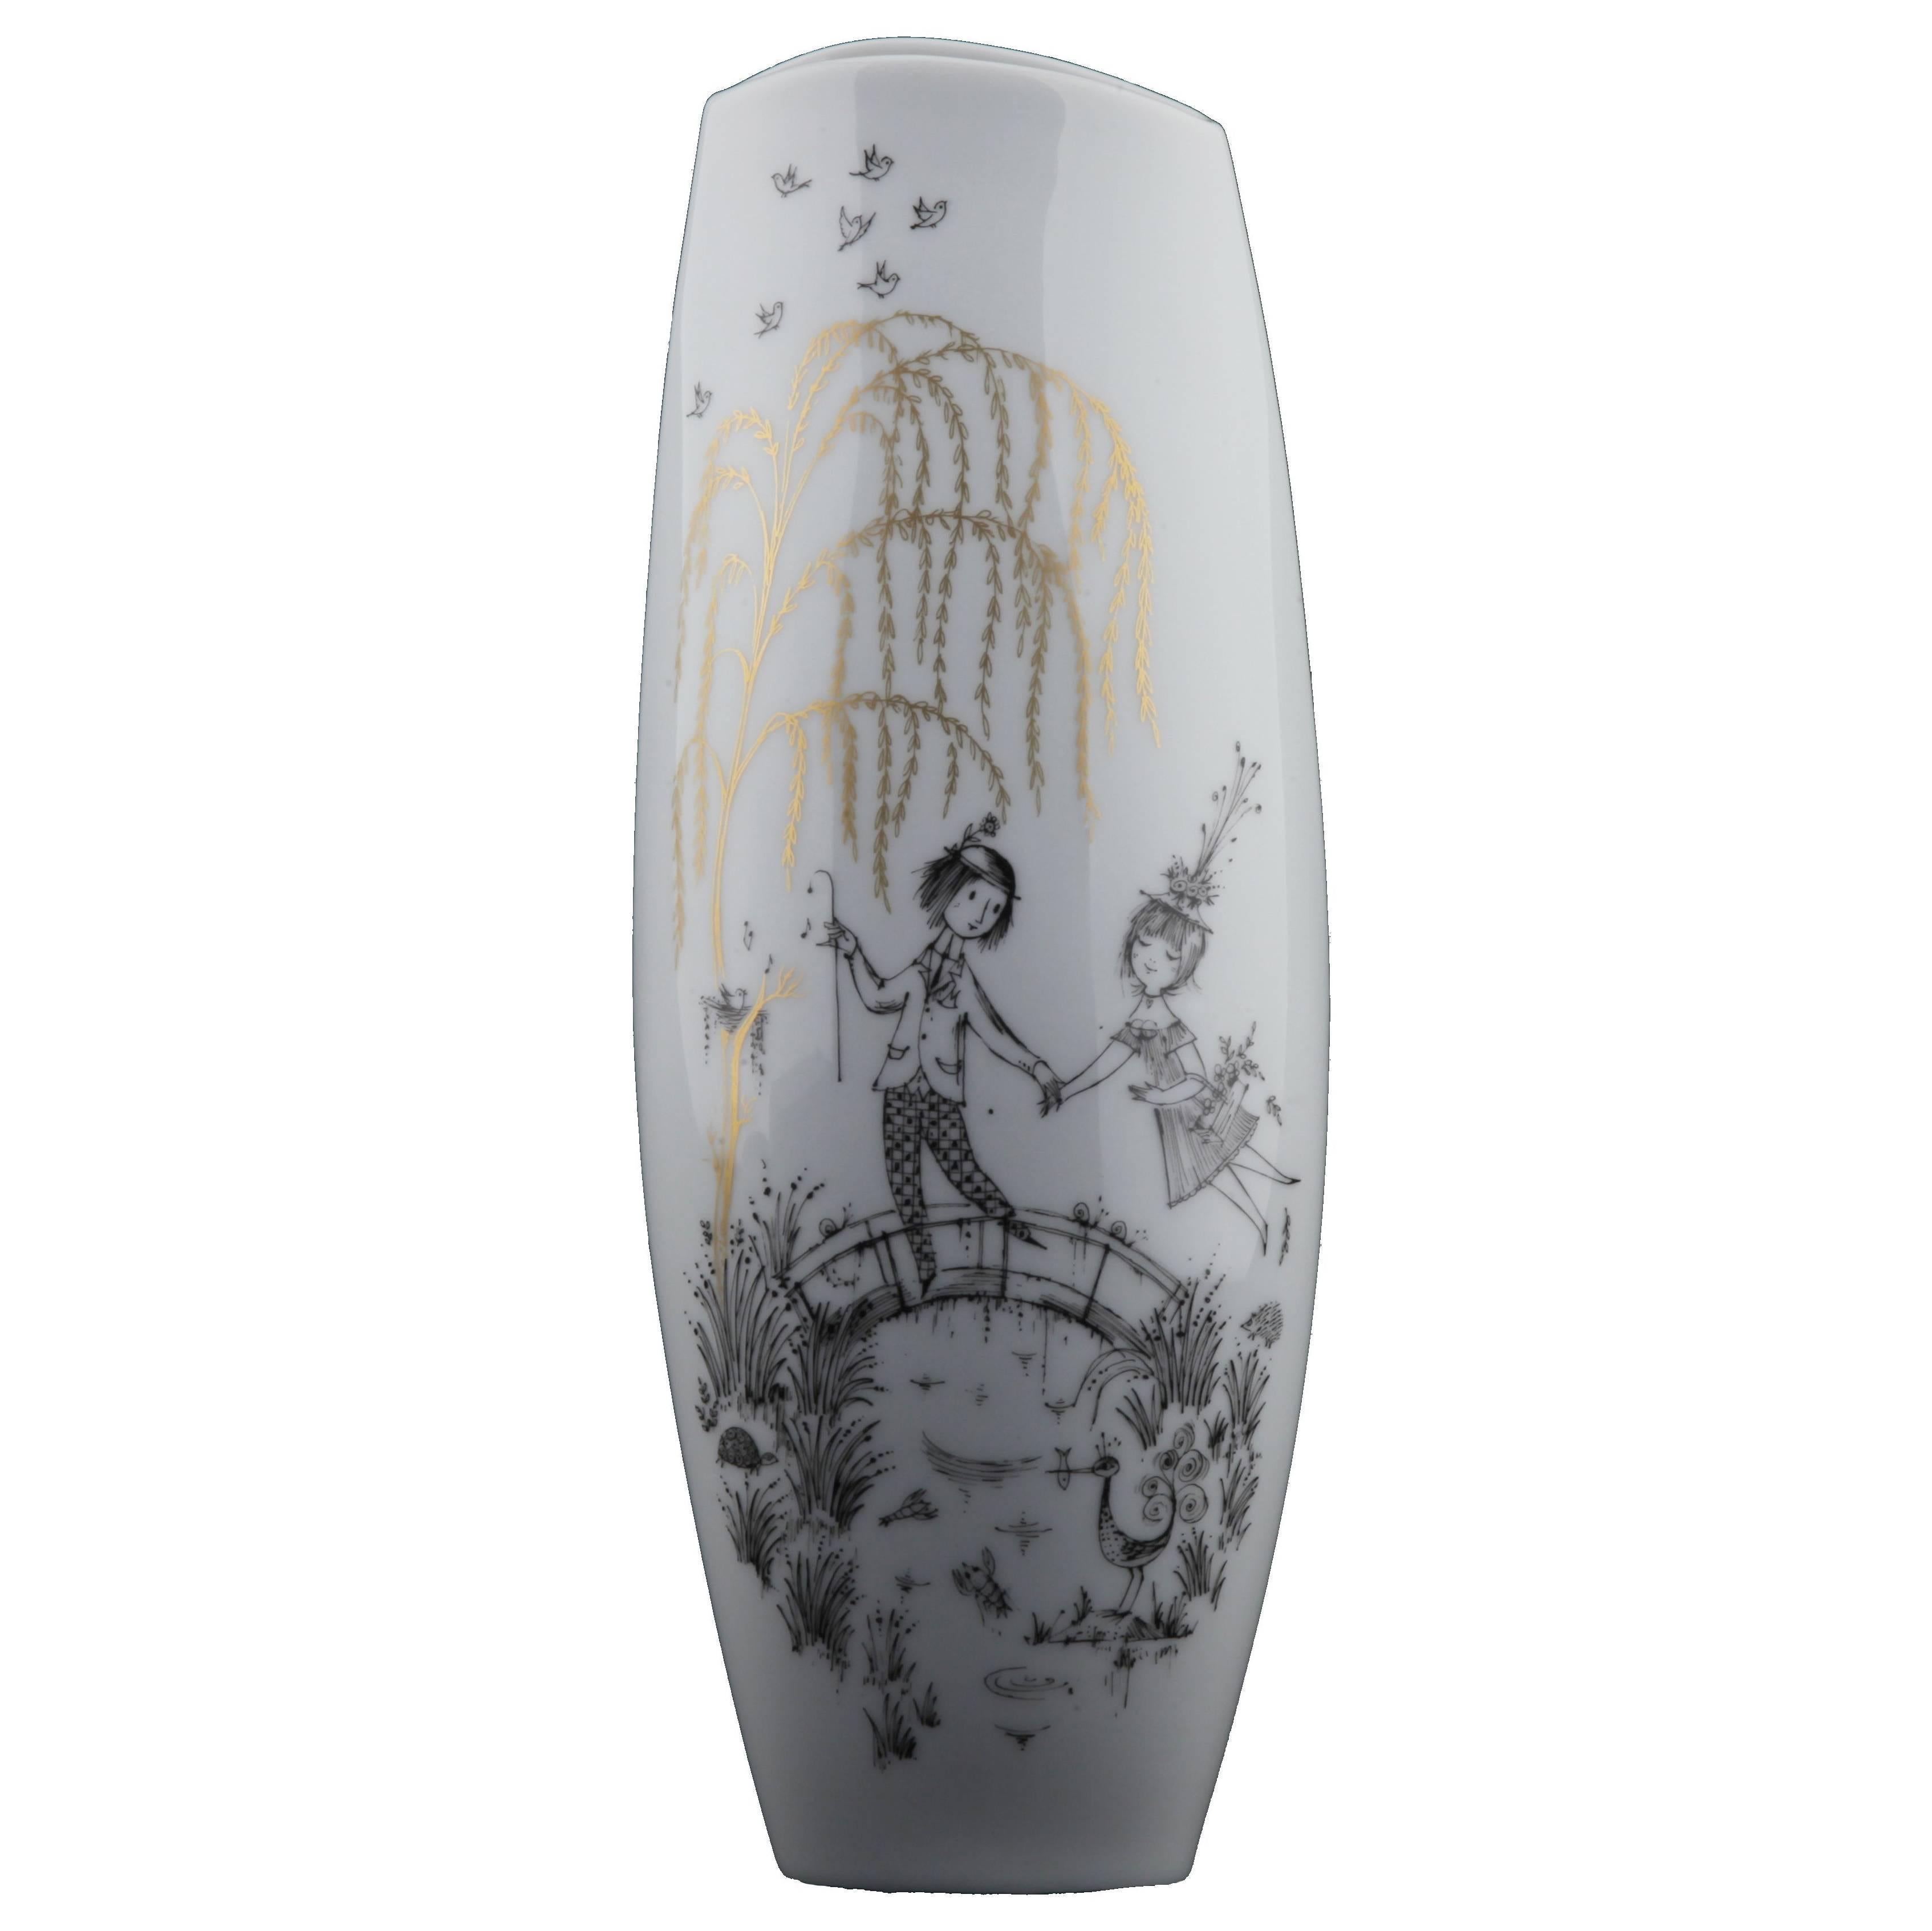 Rosenthal Studio Linie Large Vase the Lovers, Designed by Raymond Peynet, 1960s For Sale